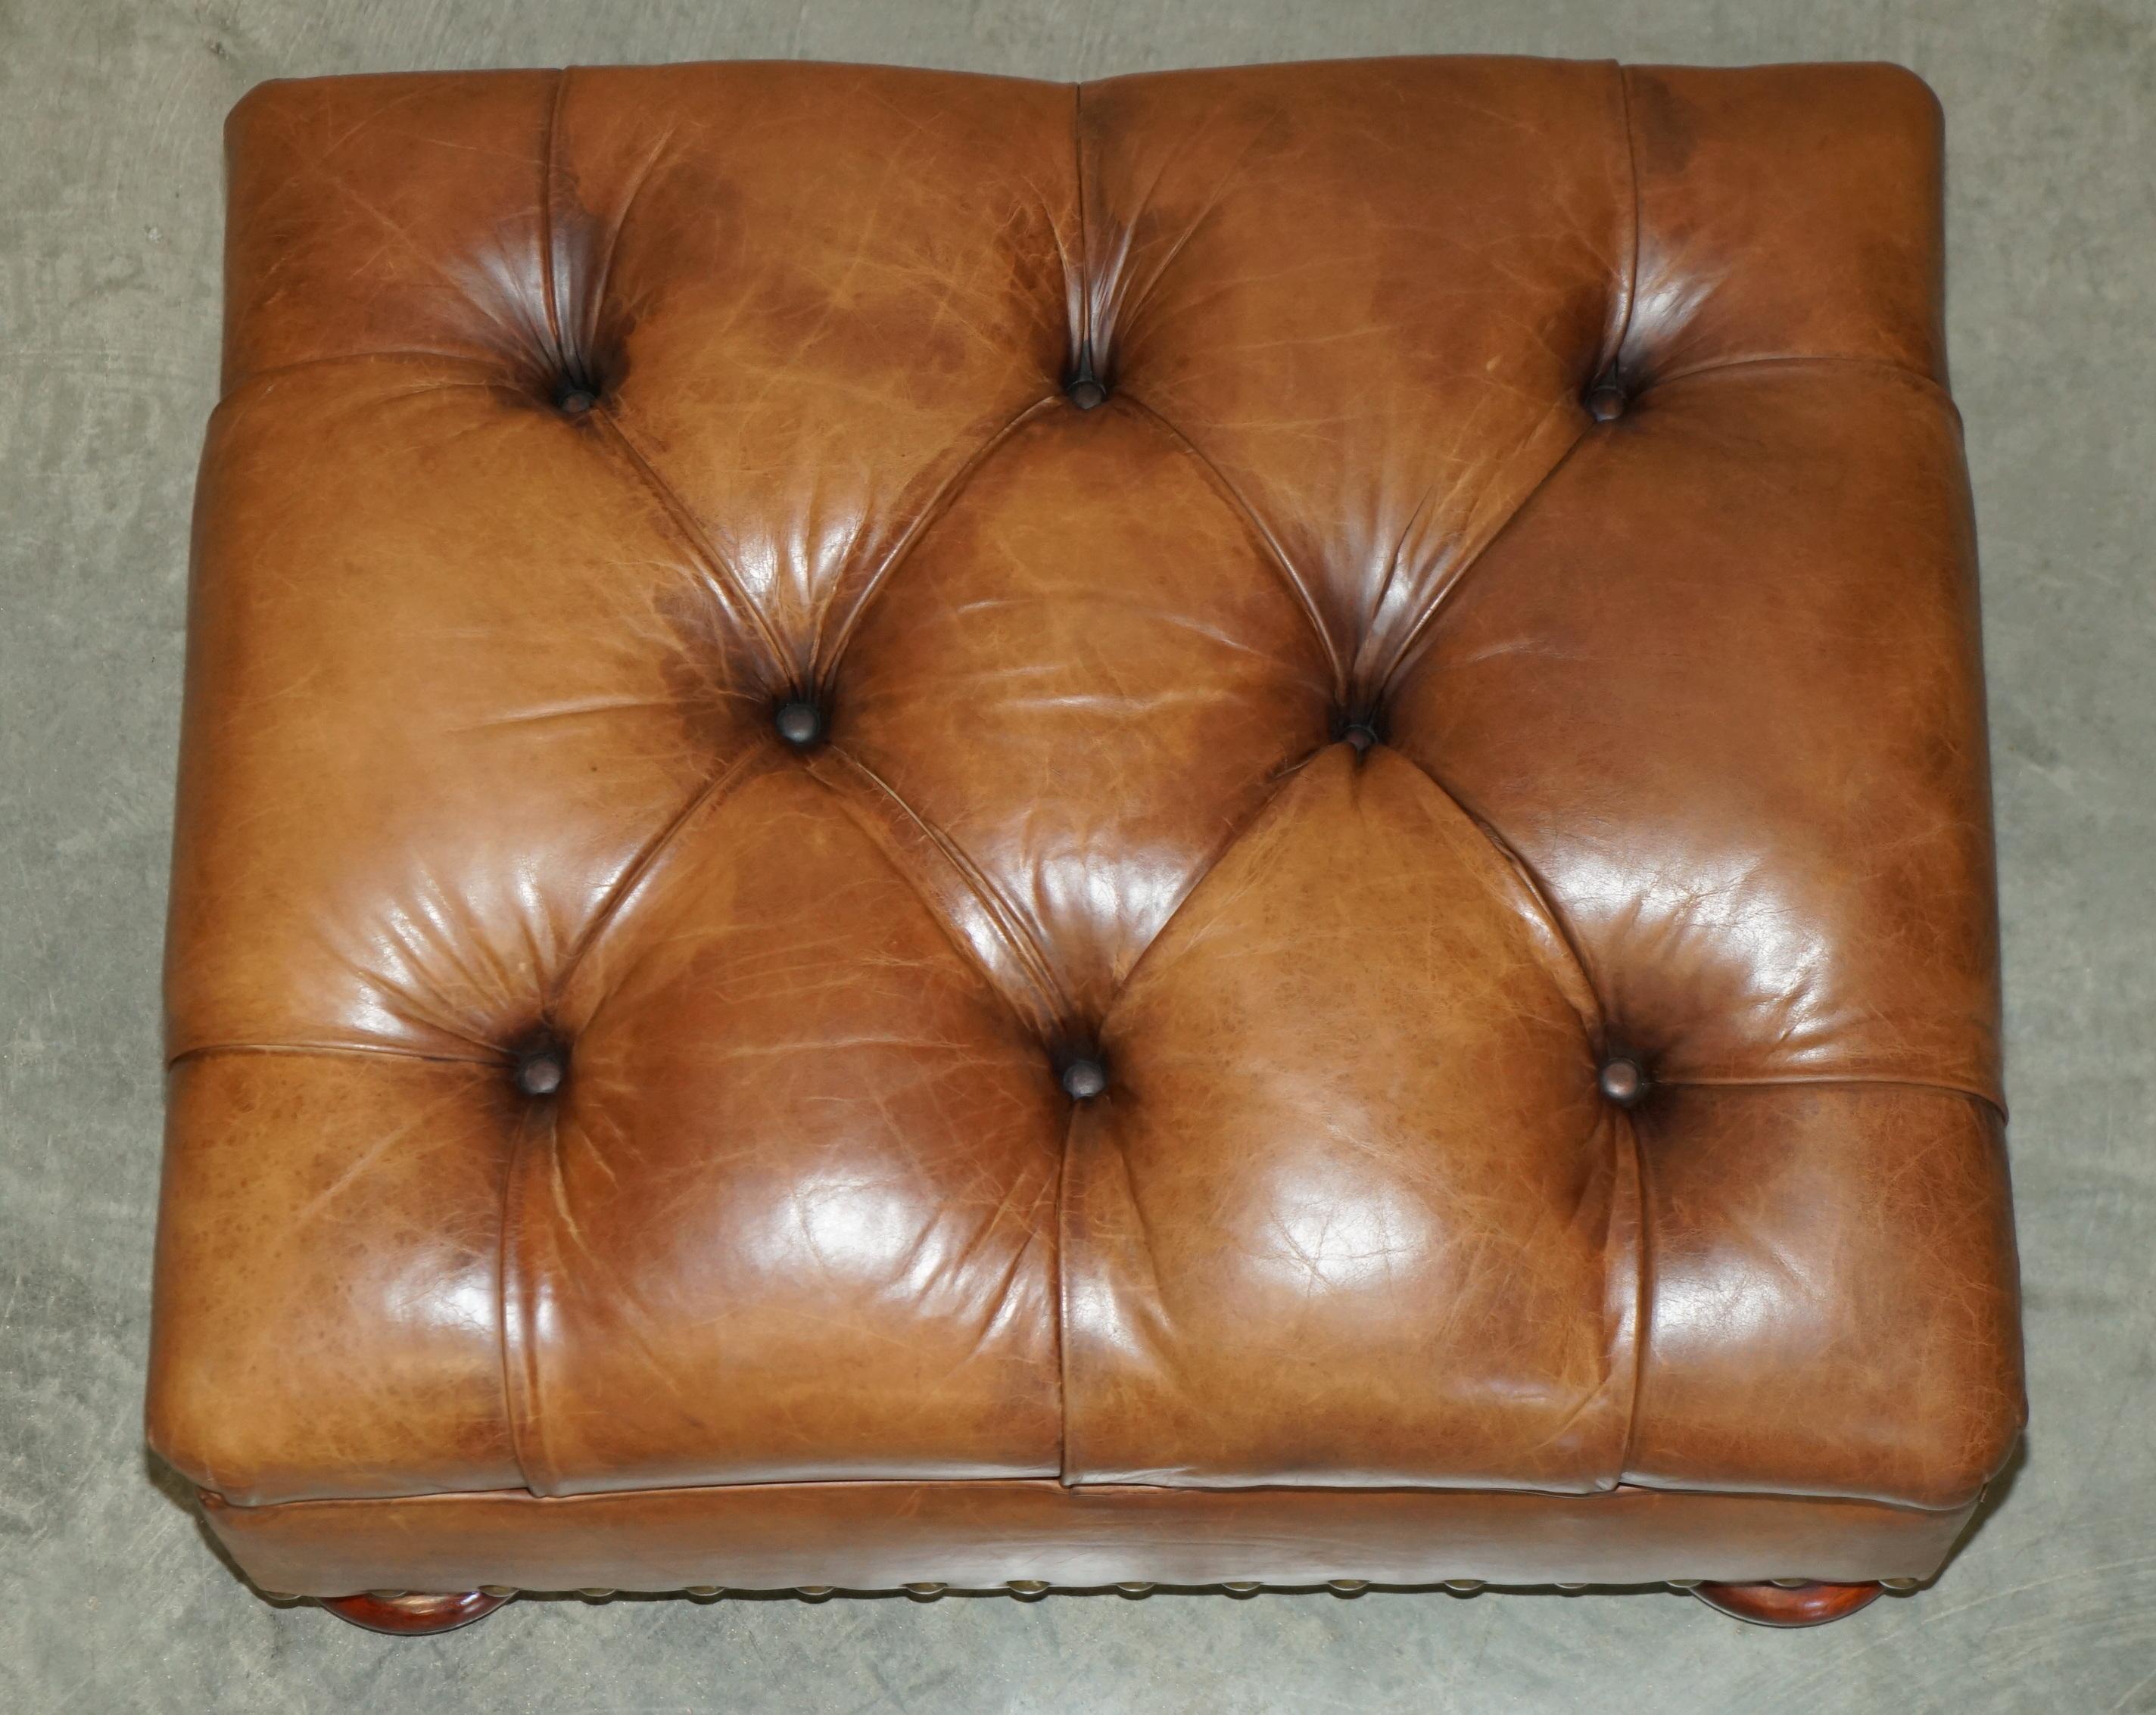 RALPH LAUREN WRITER'S CHESTERFIELD FOOTSTOOL OTTOMAN IN HERiTAGE BROWN LEATHER For Sale 3